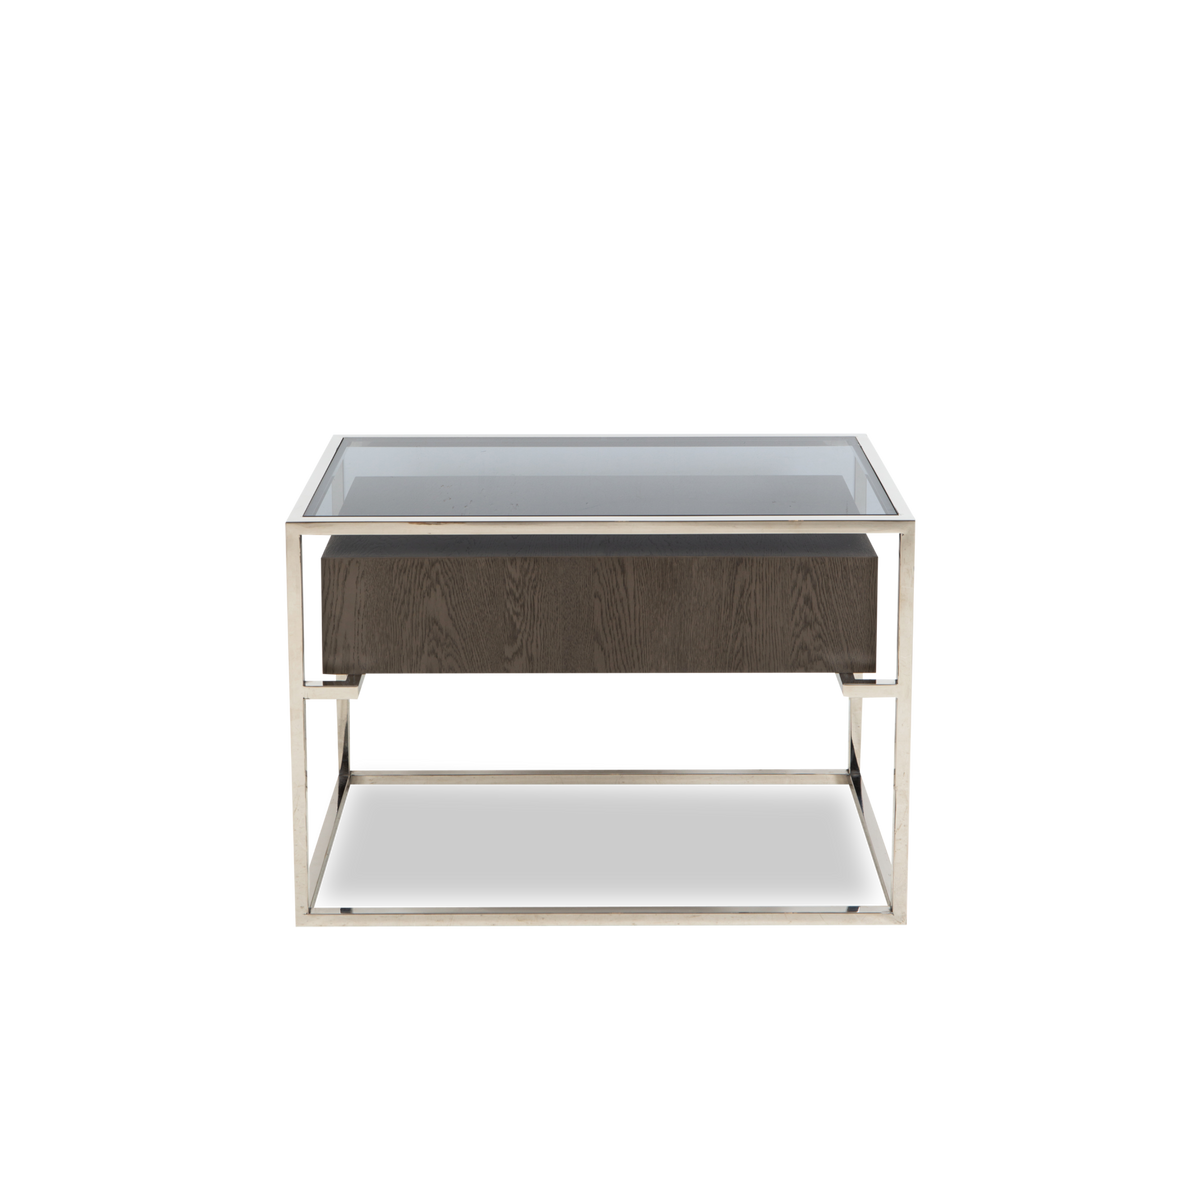 Sleek design meets mixed materials to form the Wheeler End Table.